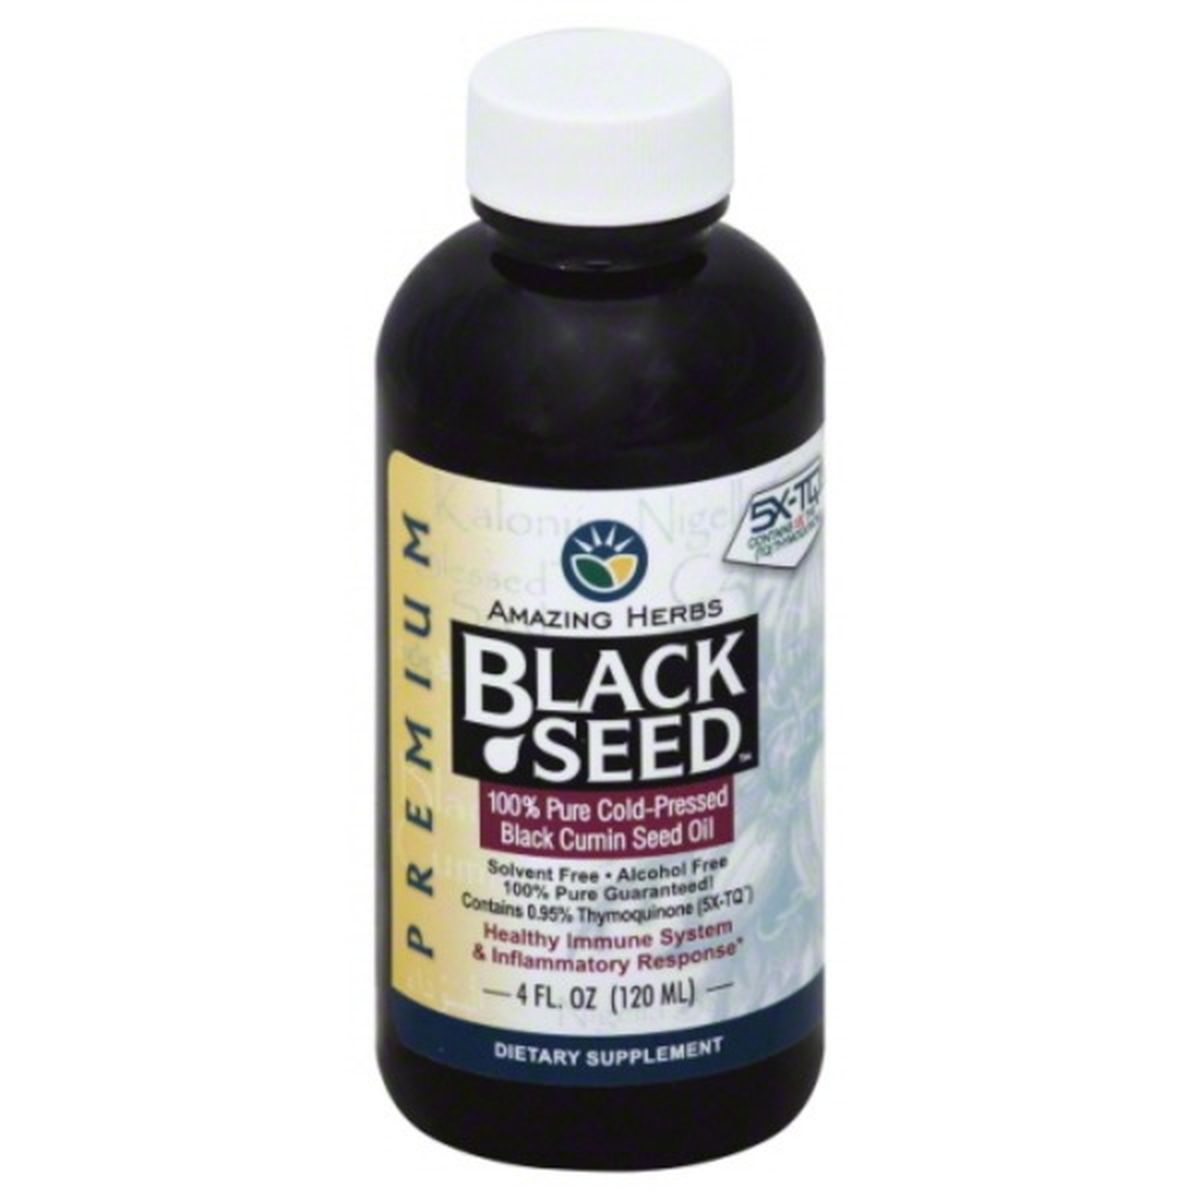 Calories in Amazing Herbs Black Seed Black Cumin Seed Oil, Premium, 100% Pure Cold-Pressed